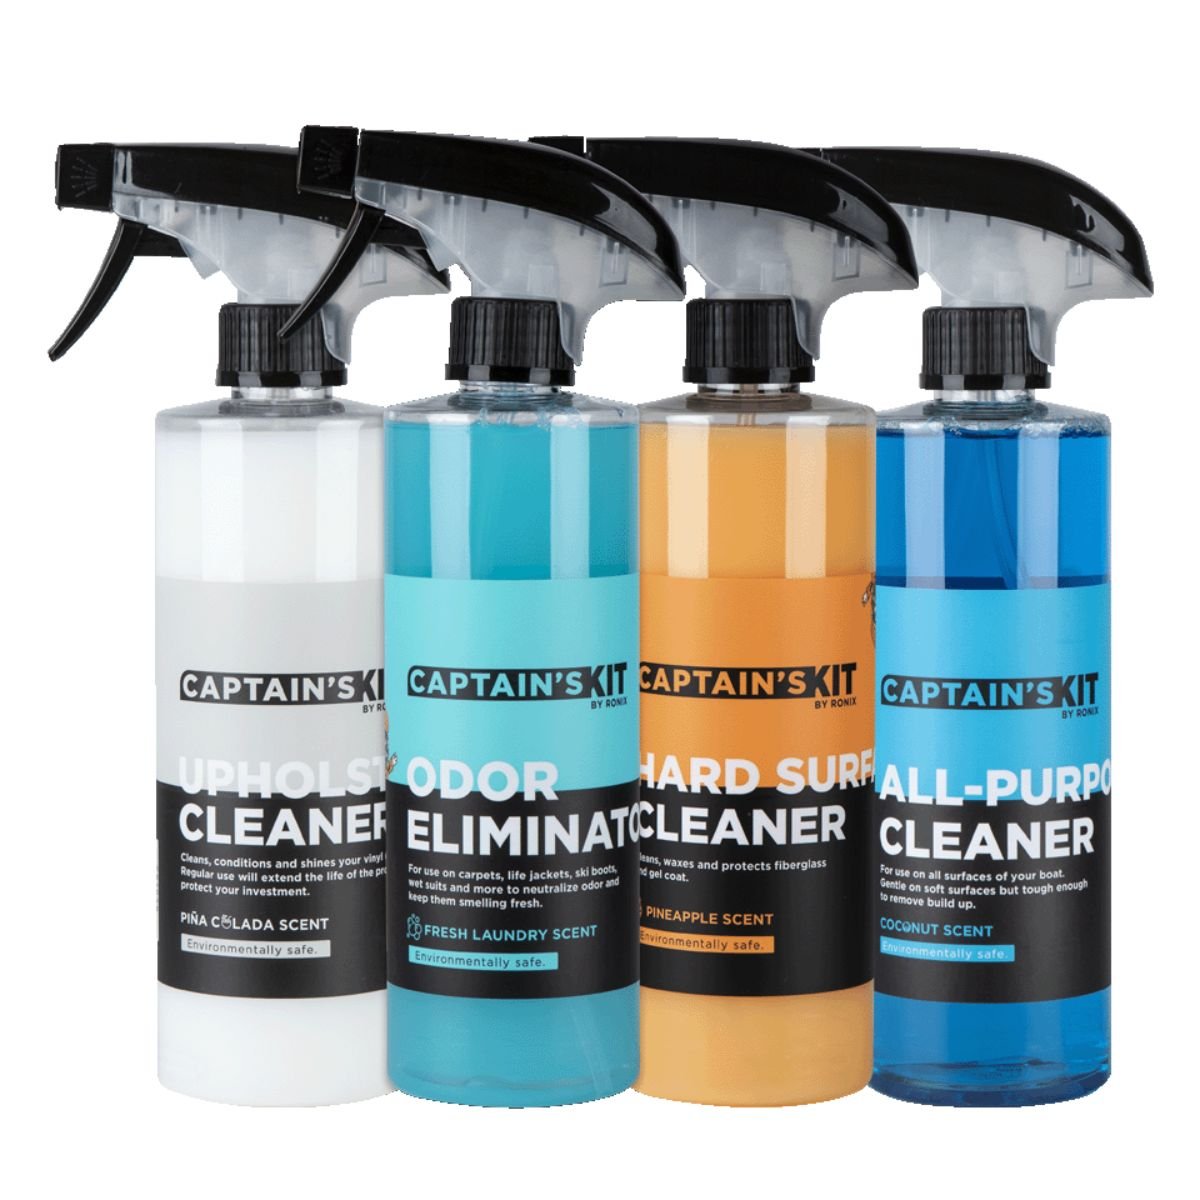 Ronix Captain's Kit 4pack - 16oz Cleaners (Upholstery, Hard Surface, Odor Elim, All Purpose) - BoardCo